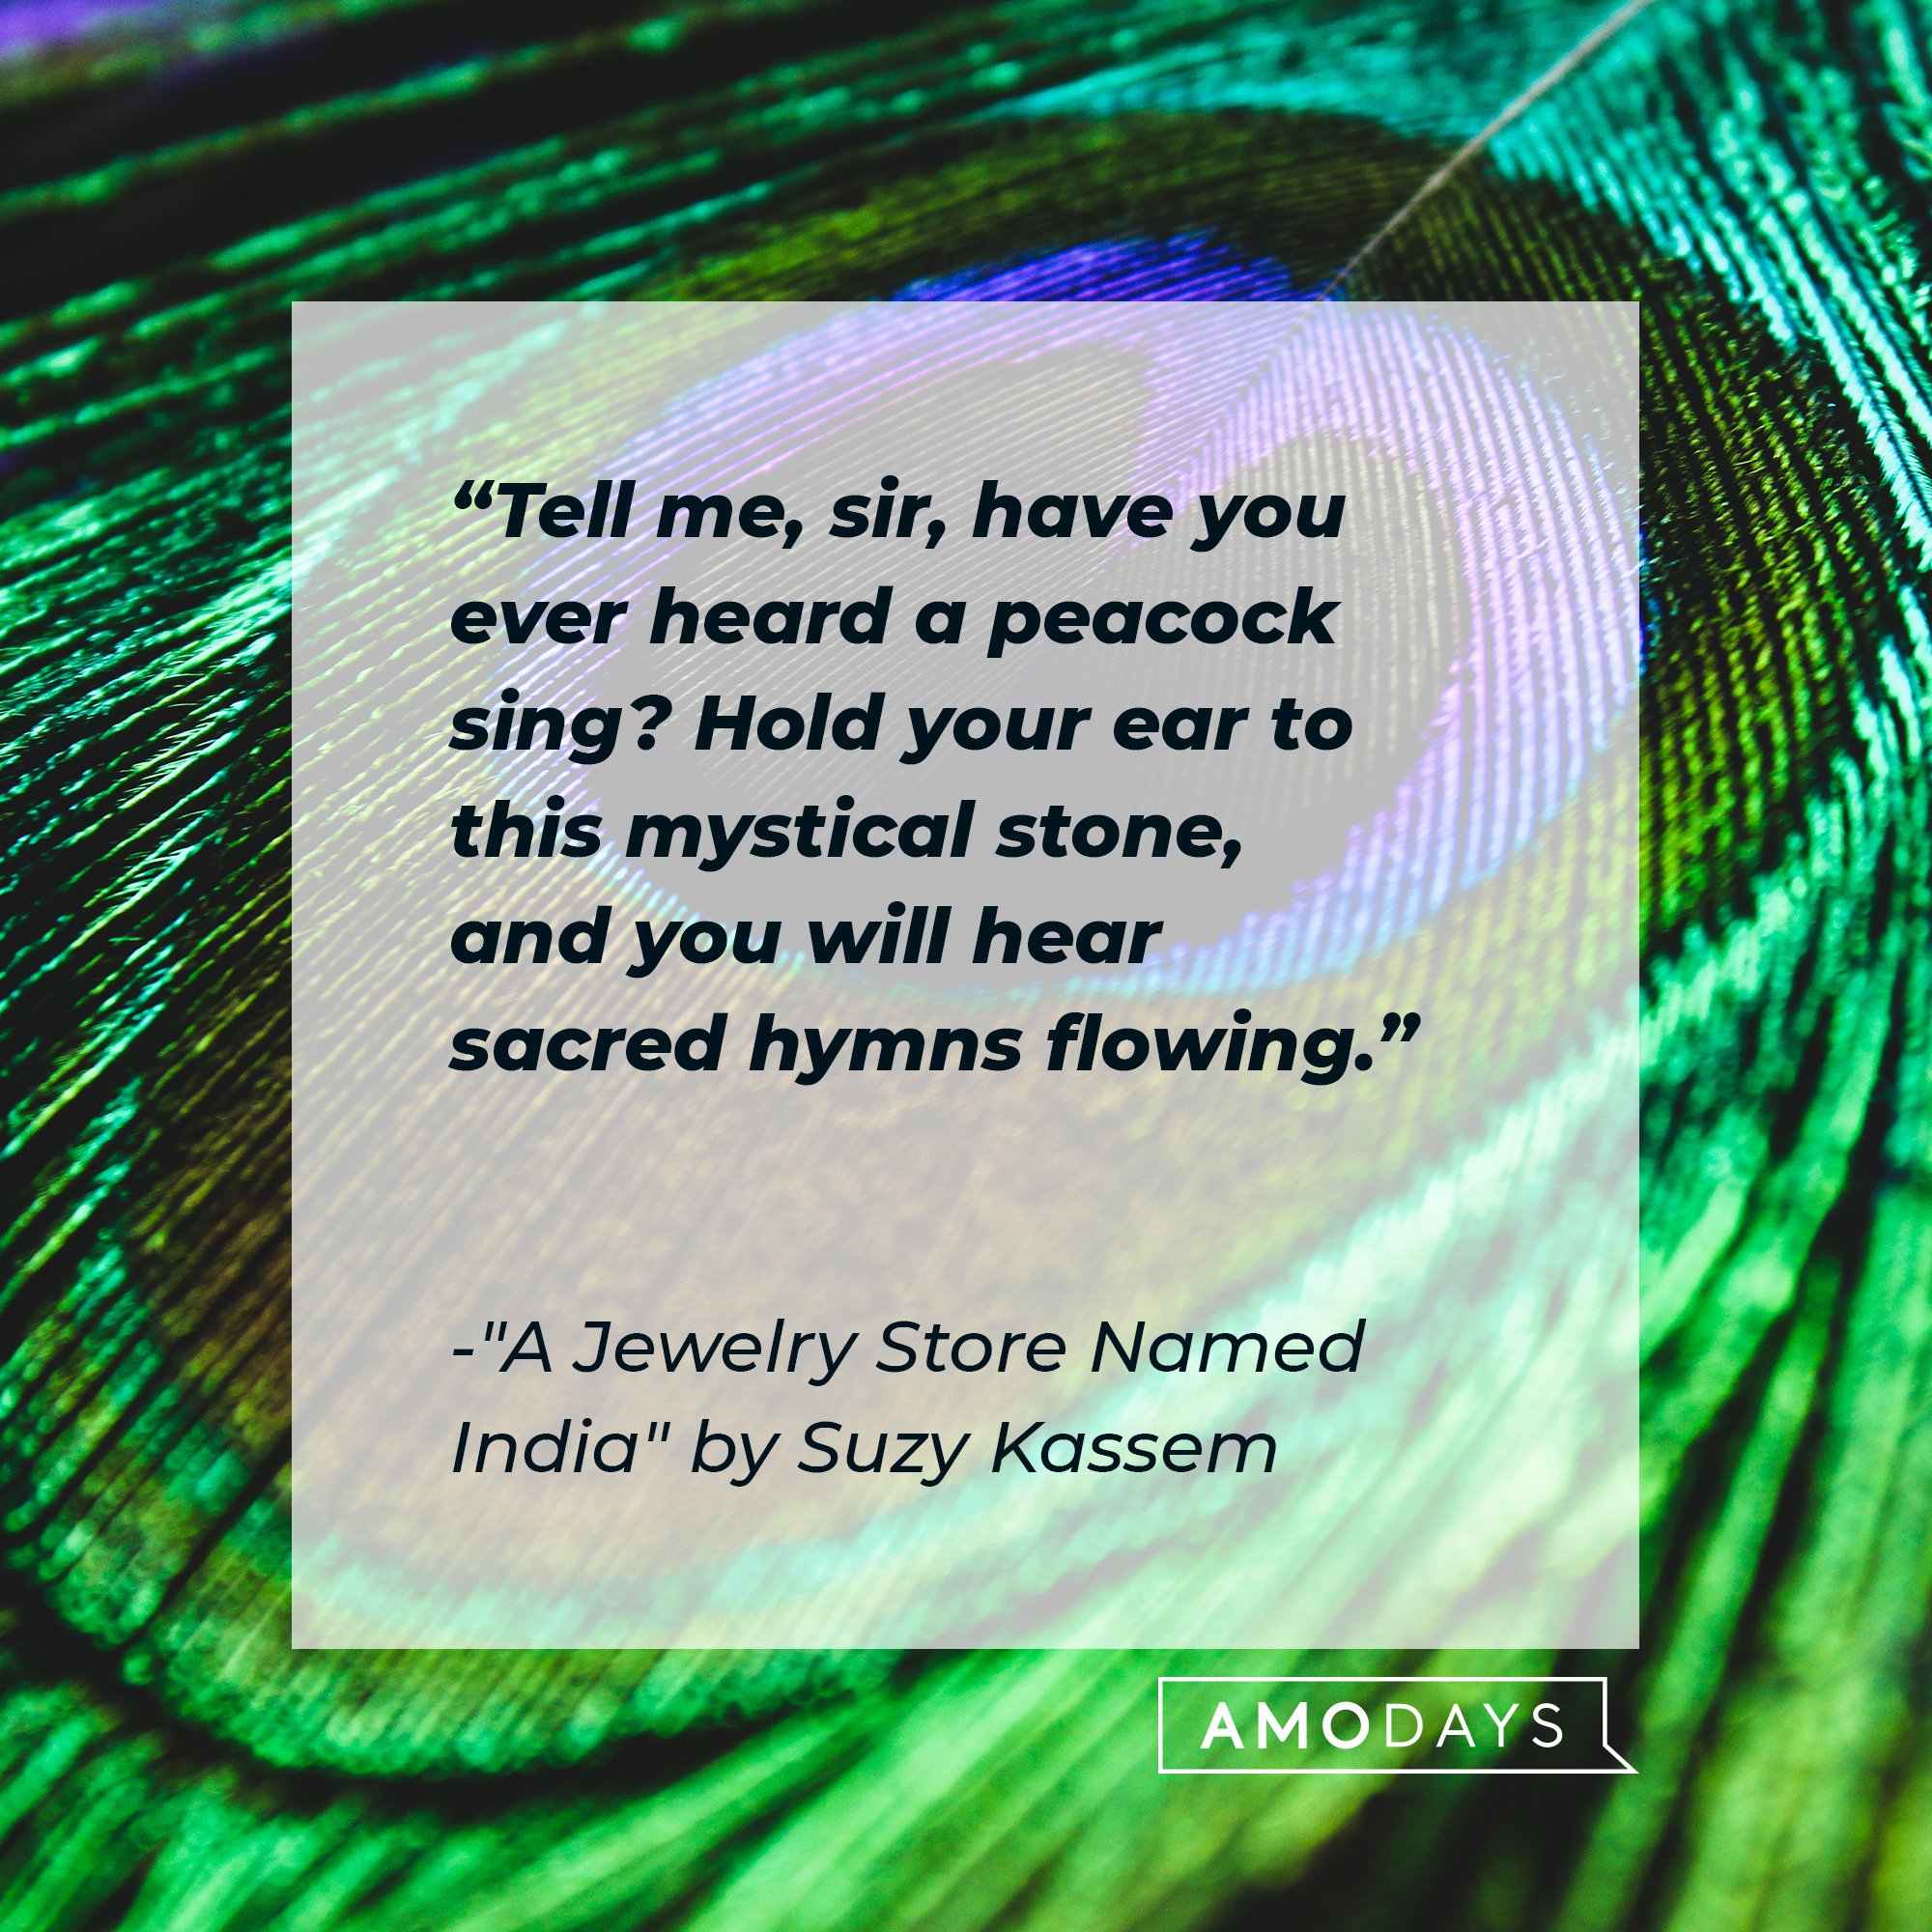 Suzy Kassem’s quote: "Tell me, sir, have you ever heard a peacock sing? Hold your ear to this mystical stone, and you will hear sacred hymns flowing." | Image: AmoDays